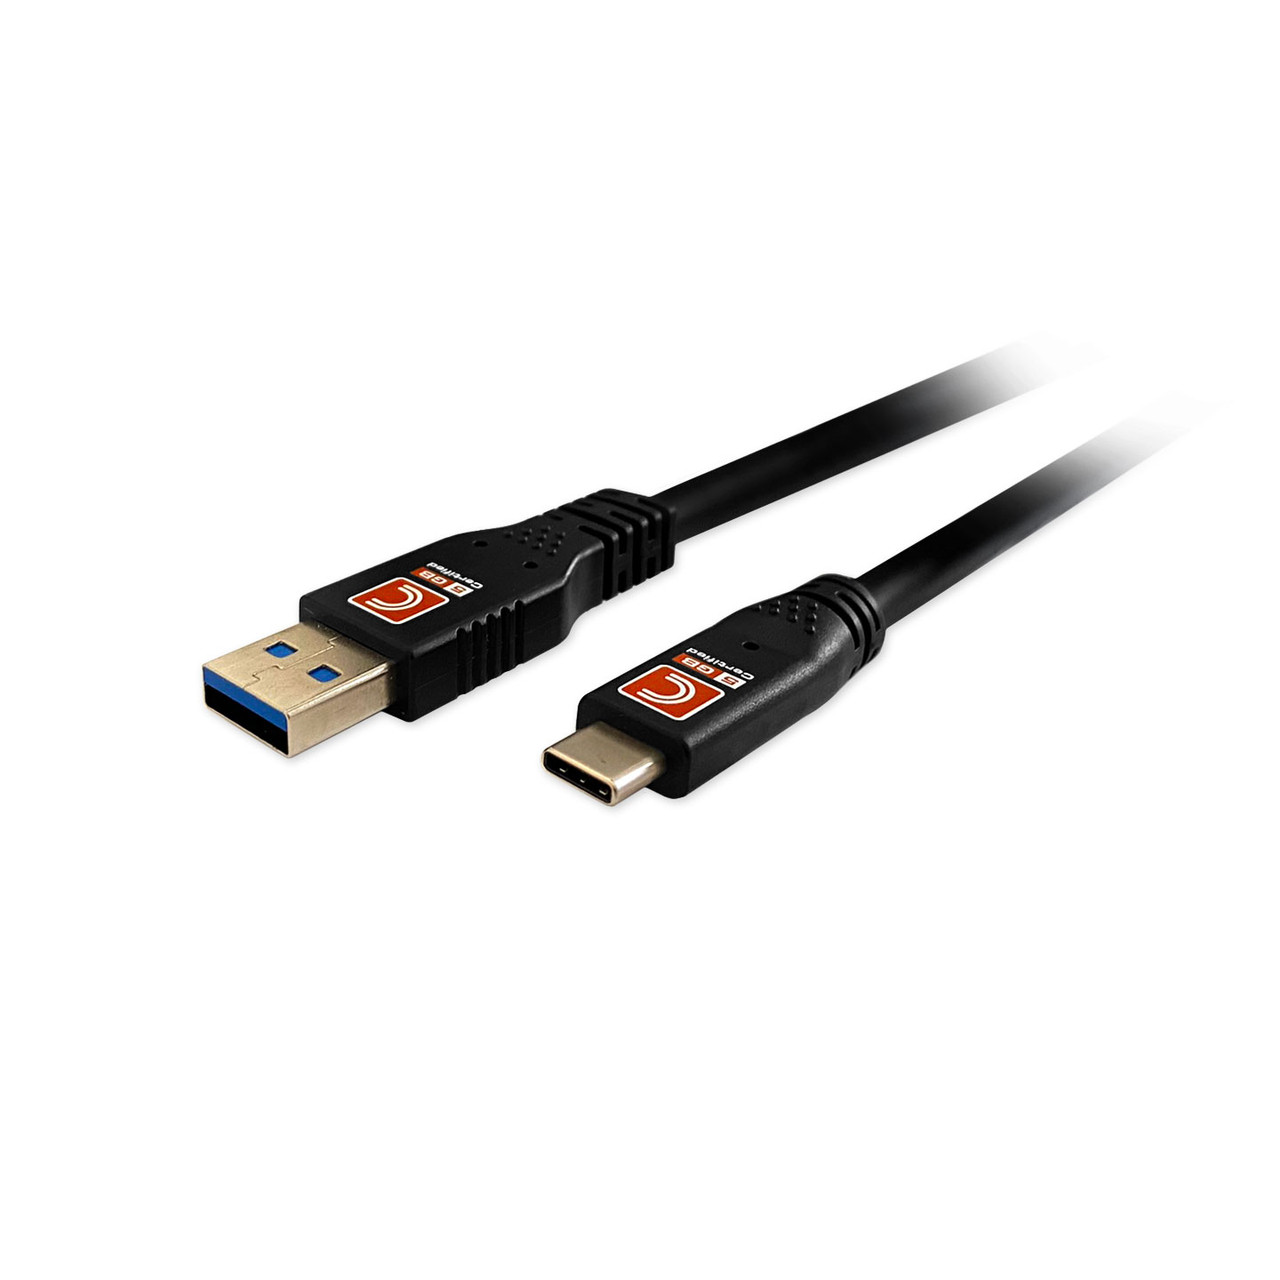 USB 3.0 A Male to B Male cable gold-plated - 3Feet